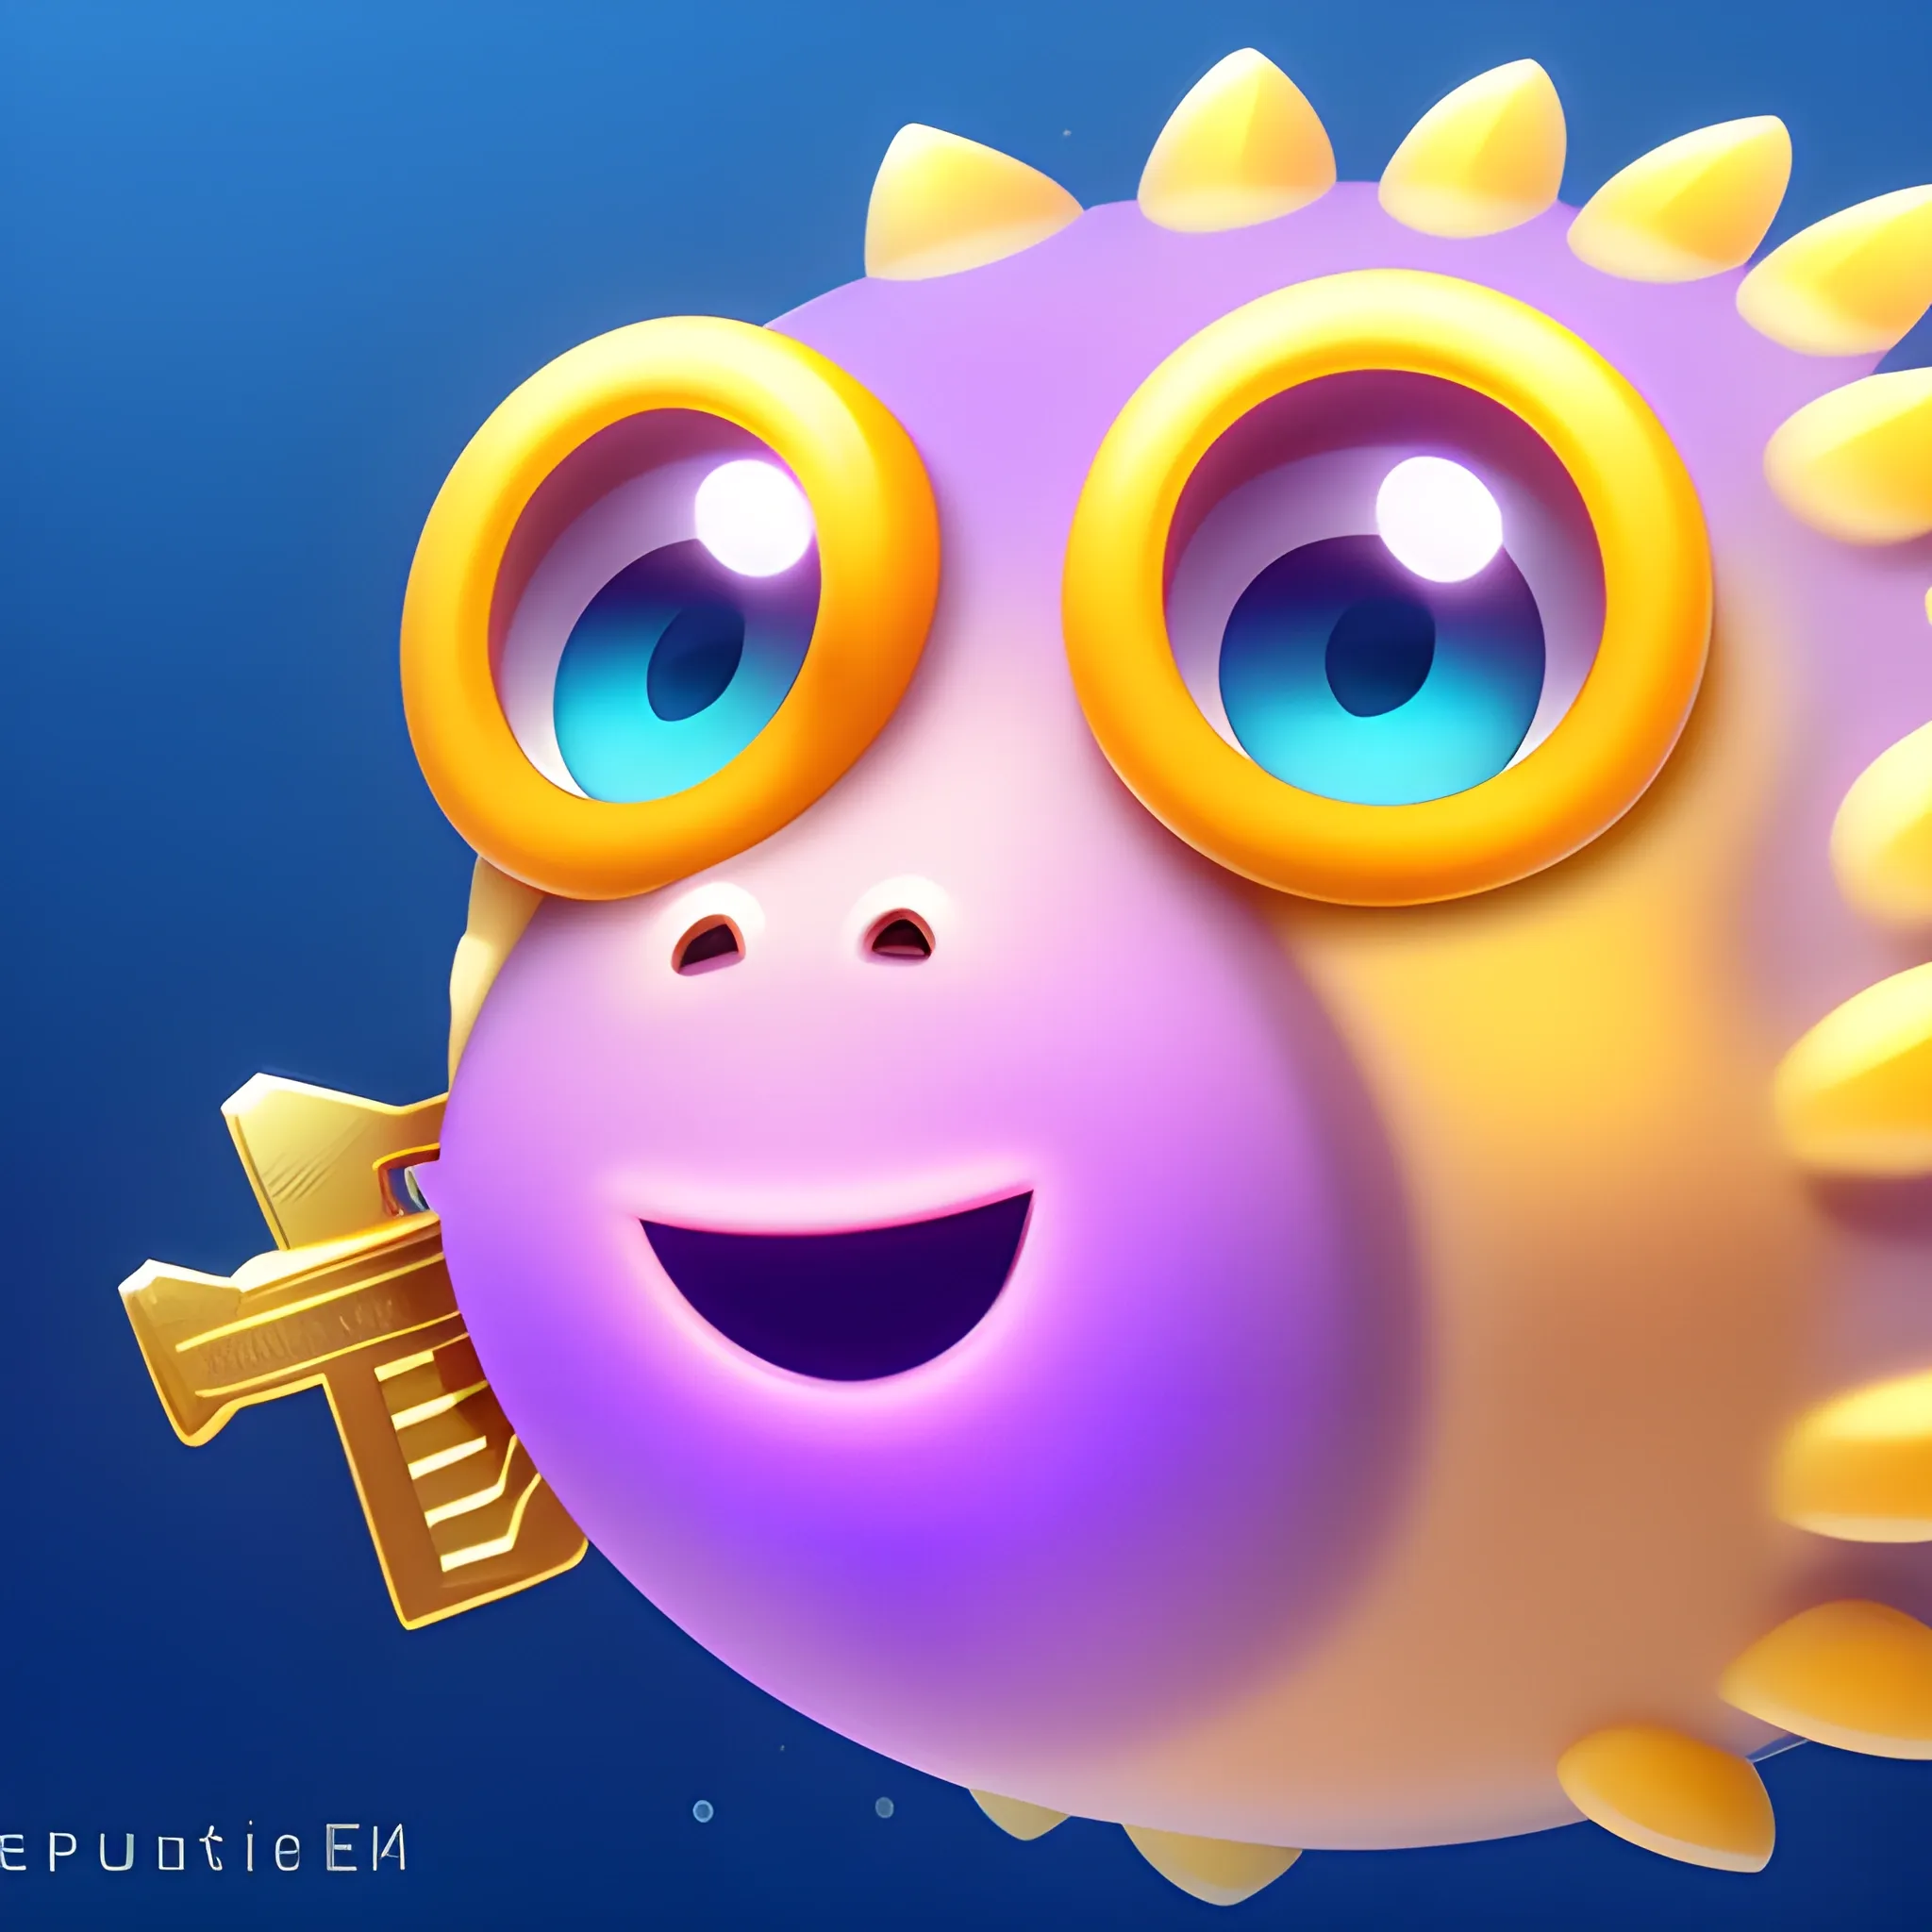 A purple cute puffer fish holding a key in one fin and two ethereum coins in the other